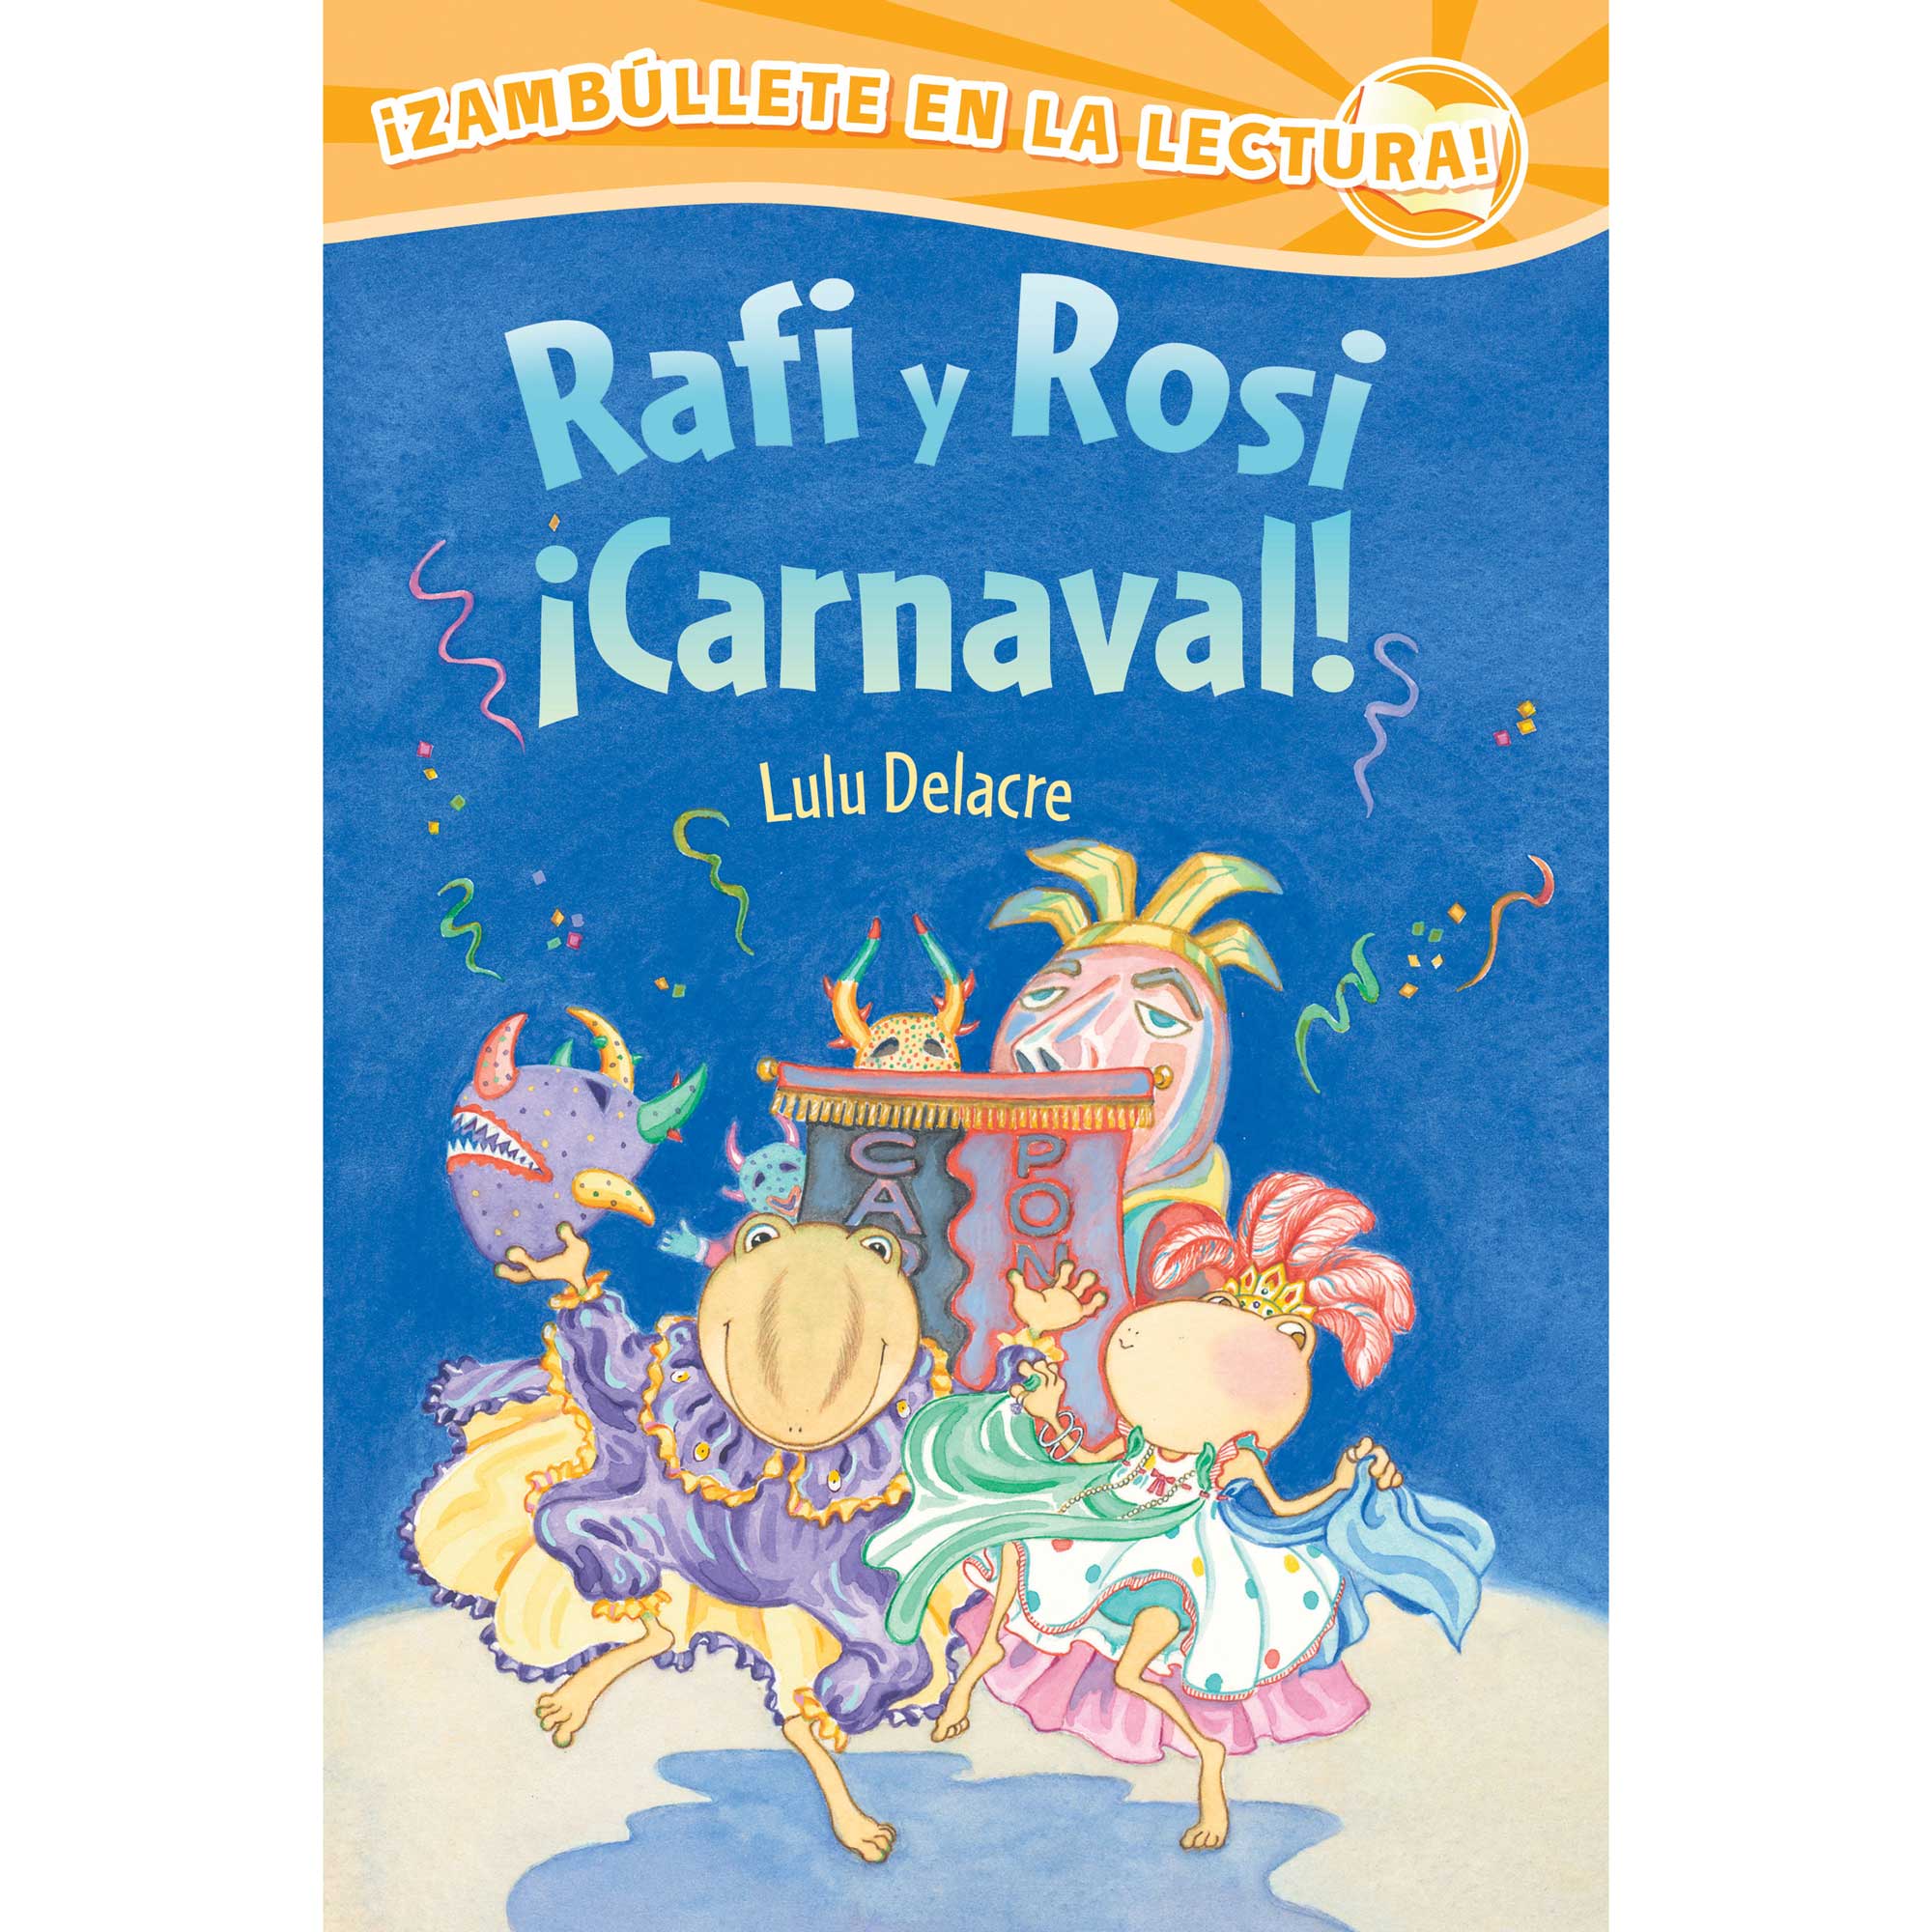 rafi and rosie carnival childrens book by lulu delacre